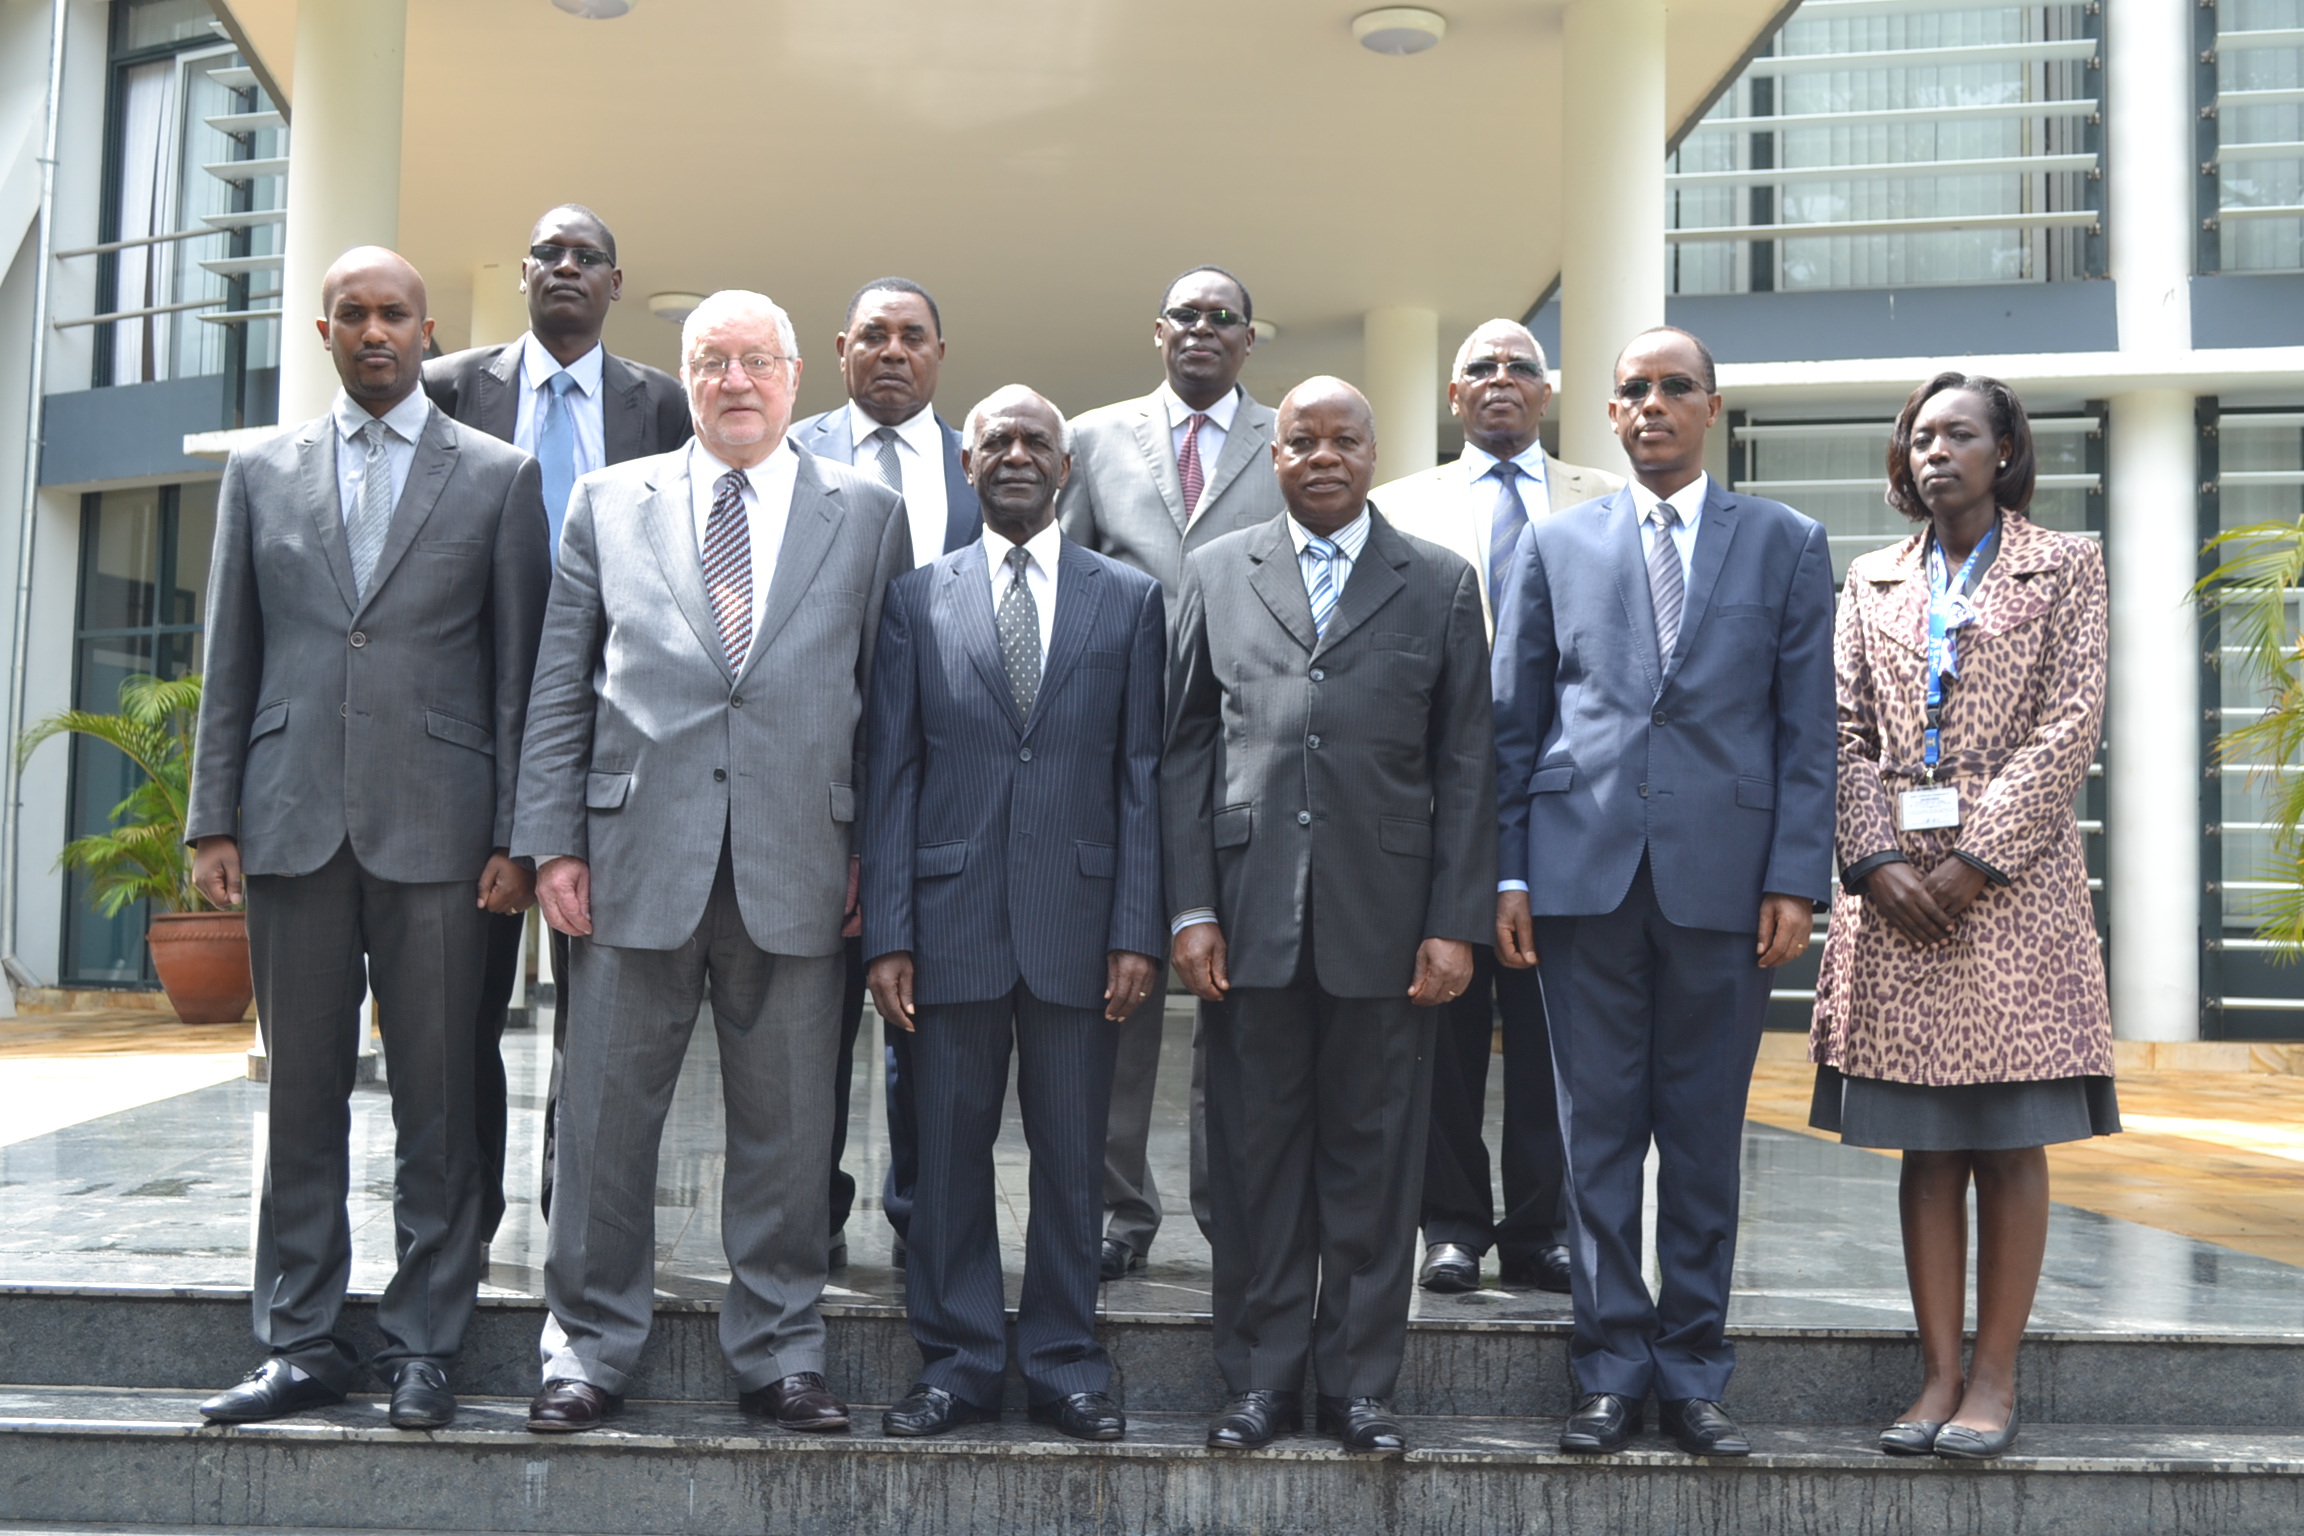 EACJ Judges’ training on emerging trends in arbitration sets off